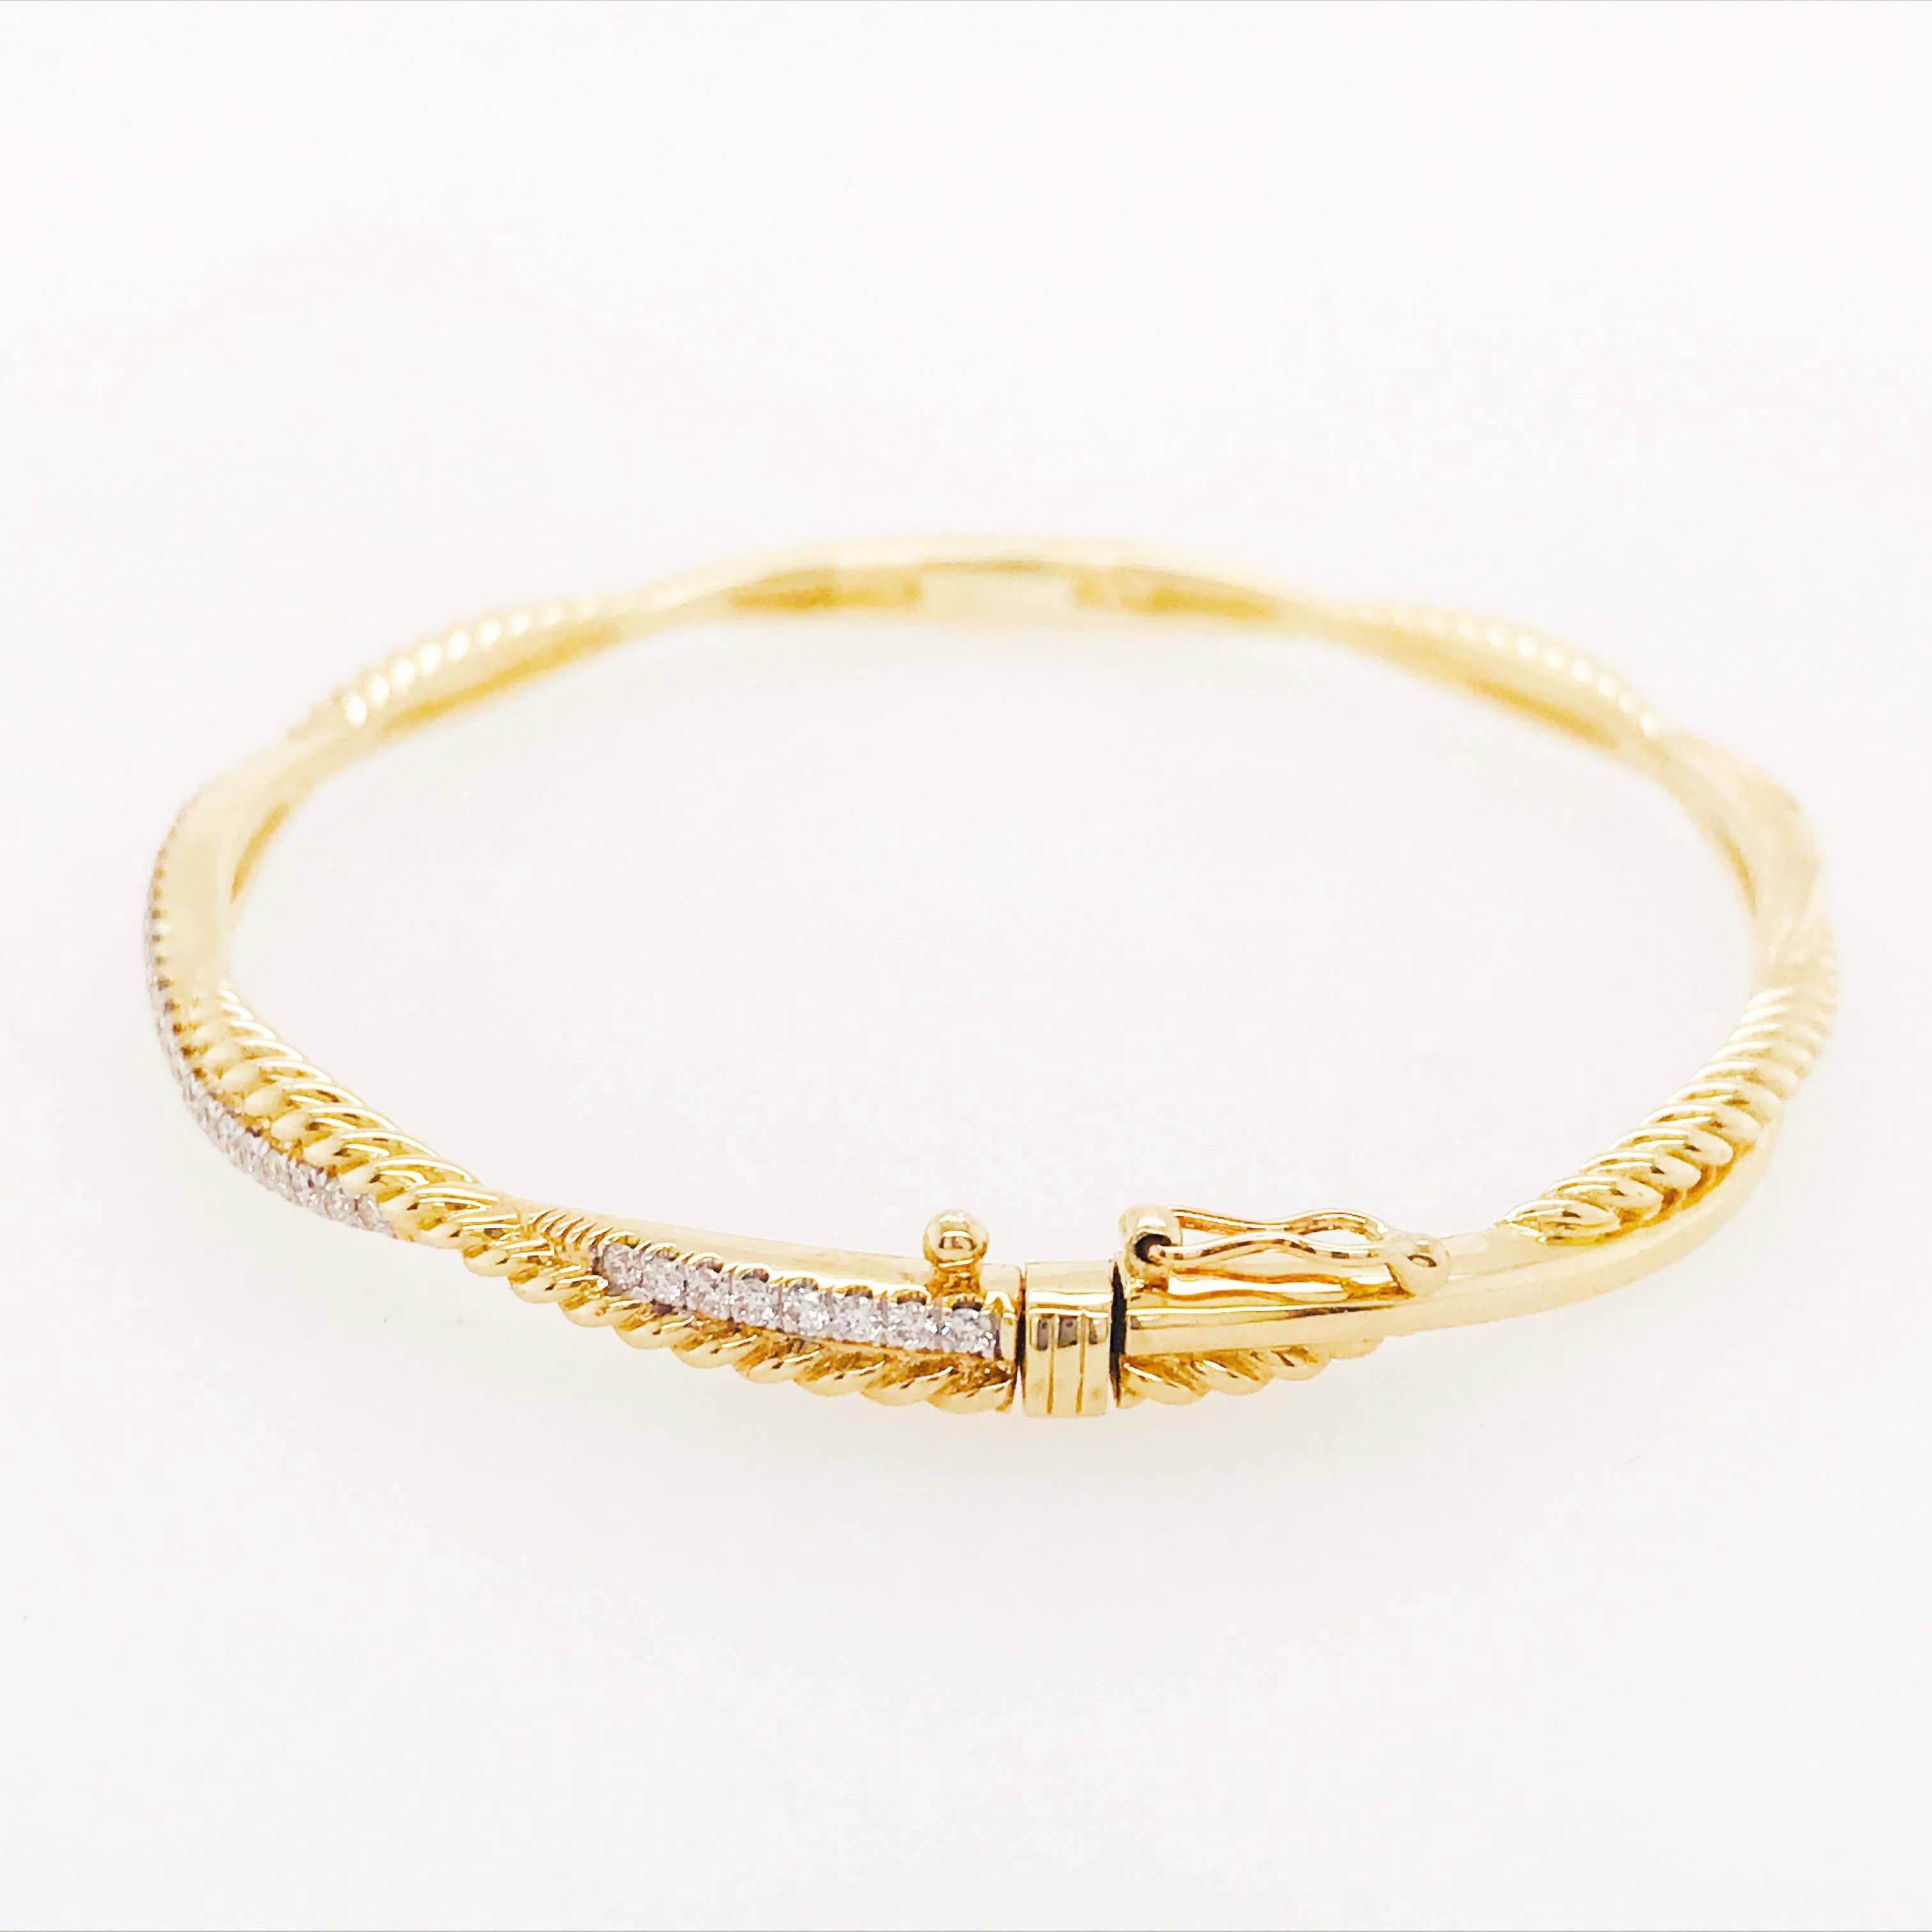 Bangle Tennis Bracelet a Twist of Diamonds and Rope Design in 14 Karat Gold In New Condition For Sale In Austin, TX